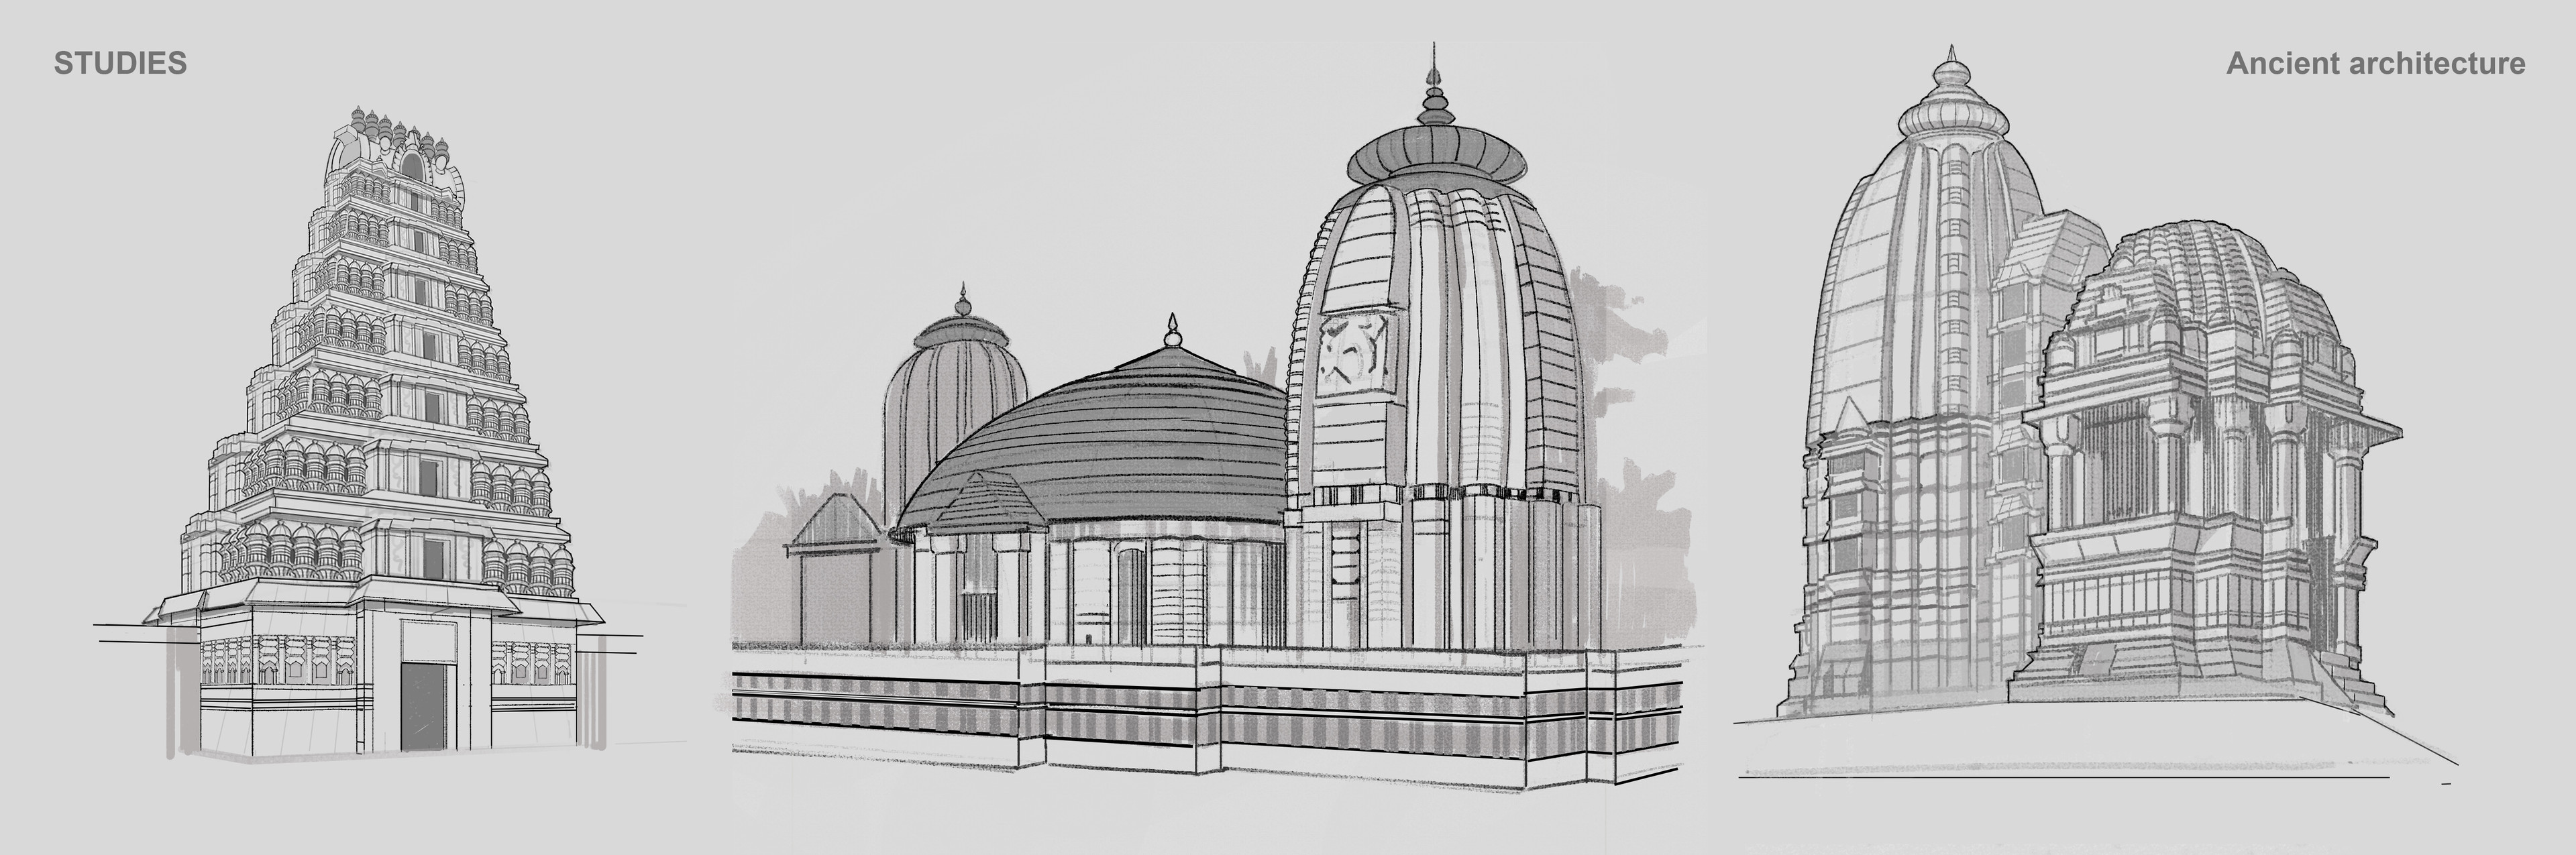 South Indian temple architecture | Encyclopedia Britannica  #classicalarchitecture | Indian temple architecture, Indian architecture,  India architecture